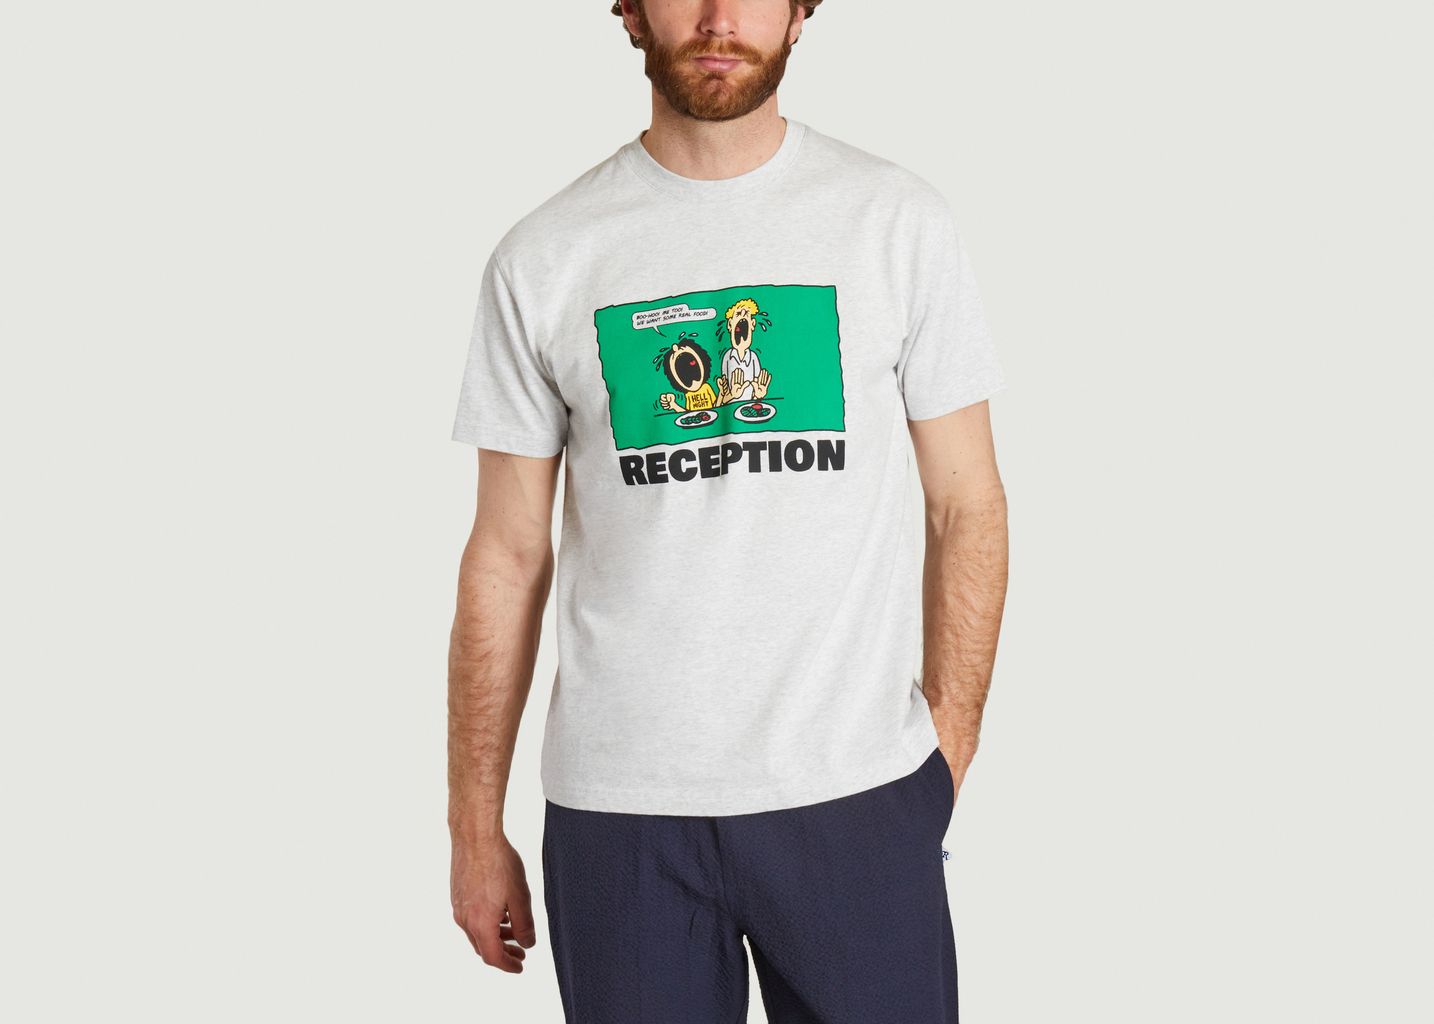 Athletic T-Shirt boo - Reception Clothing